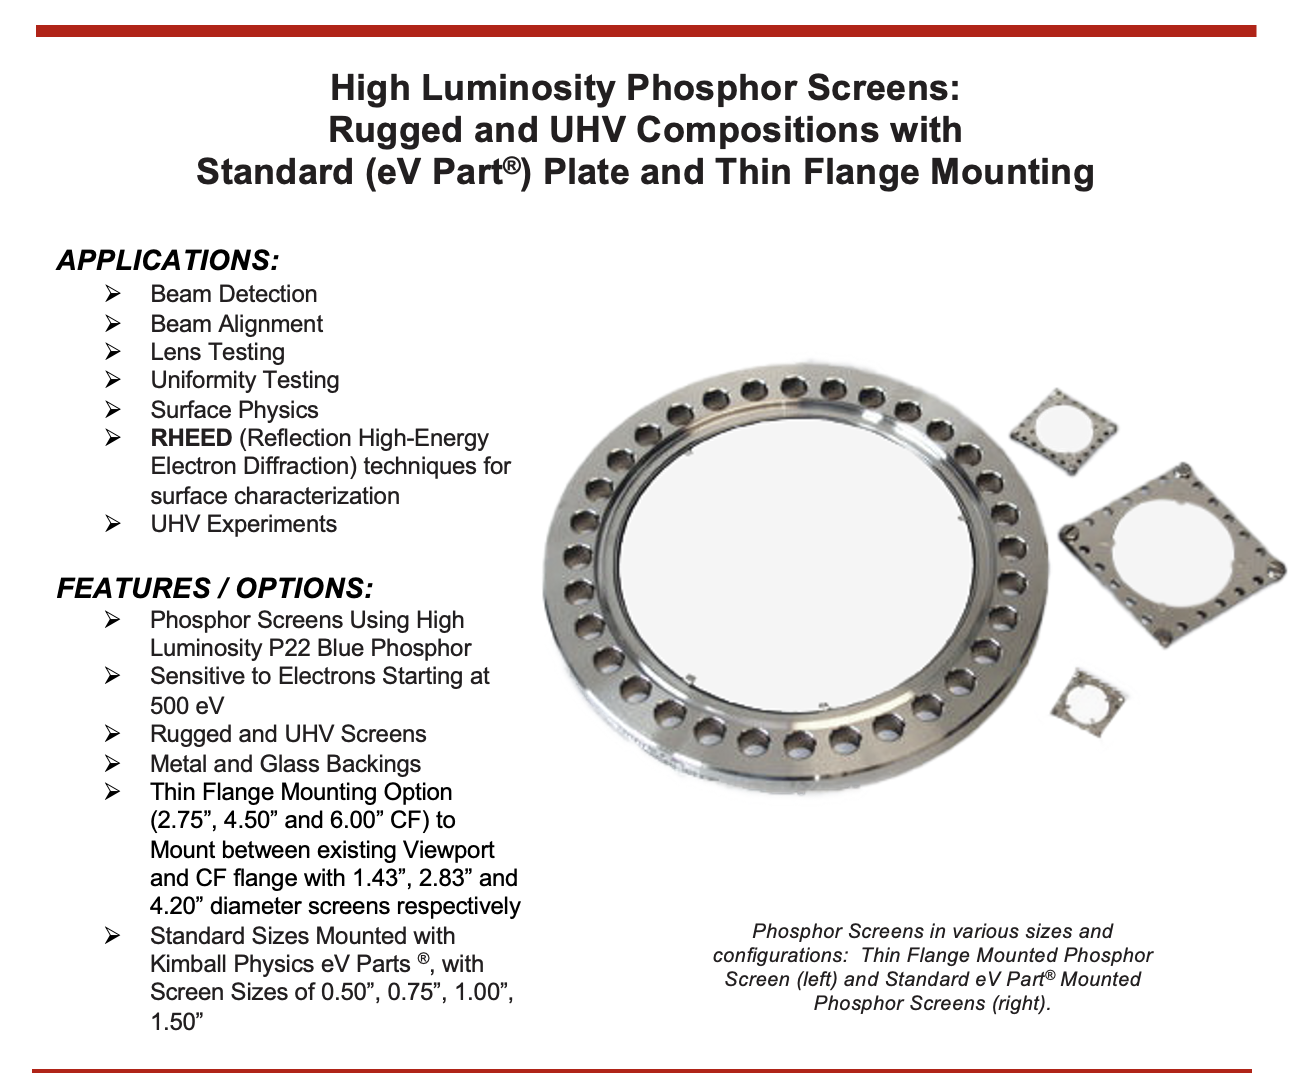 High Luminosity Phosphor Screens: Rugged and UHV Compositions with Standard (eV Part®) Plate and Thin Flange Mounting APPLICATIONS:  Beam Detection  Beam Alignment  Lens Testing  Uniformity Testing  Surface Physics  RHEED (Reflection High-Energy Electron Diffraction) techniques for surface characterization  UHV Experiments FEATURES / OPTIONS:  Phosphor Screens Using High Luminosity P22 Blue Phosphor  Sensitive to Electrons Starting at 500 eV  Rugged and UHV Screens  Metal and Glass Backings  Thin Flange Mounting Option (2.75”, 4.50” and 6.00” CF) to Mount between existing Viewport and CF flange with 1.43”, 2.83” and 4.20” diameter screens respectively  Standard Sizes Mounted with Kimball Physics eV Parts ®, with Screen Sizes of 0.50”, 0.75”, 1.00”, 1.50” 